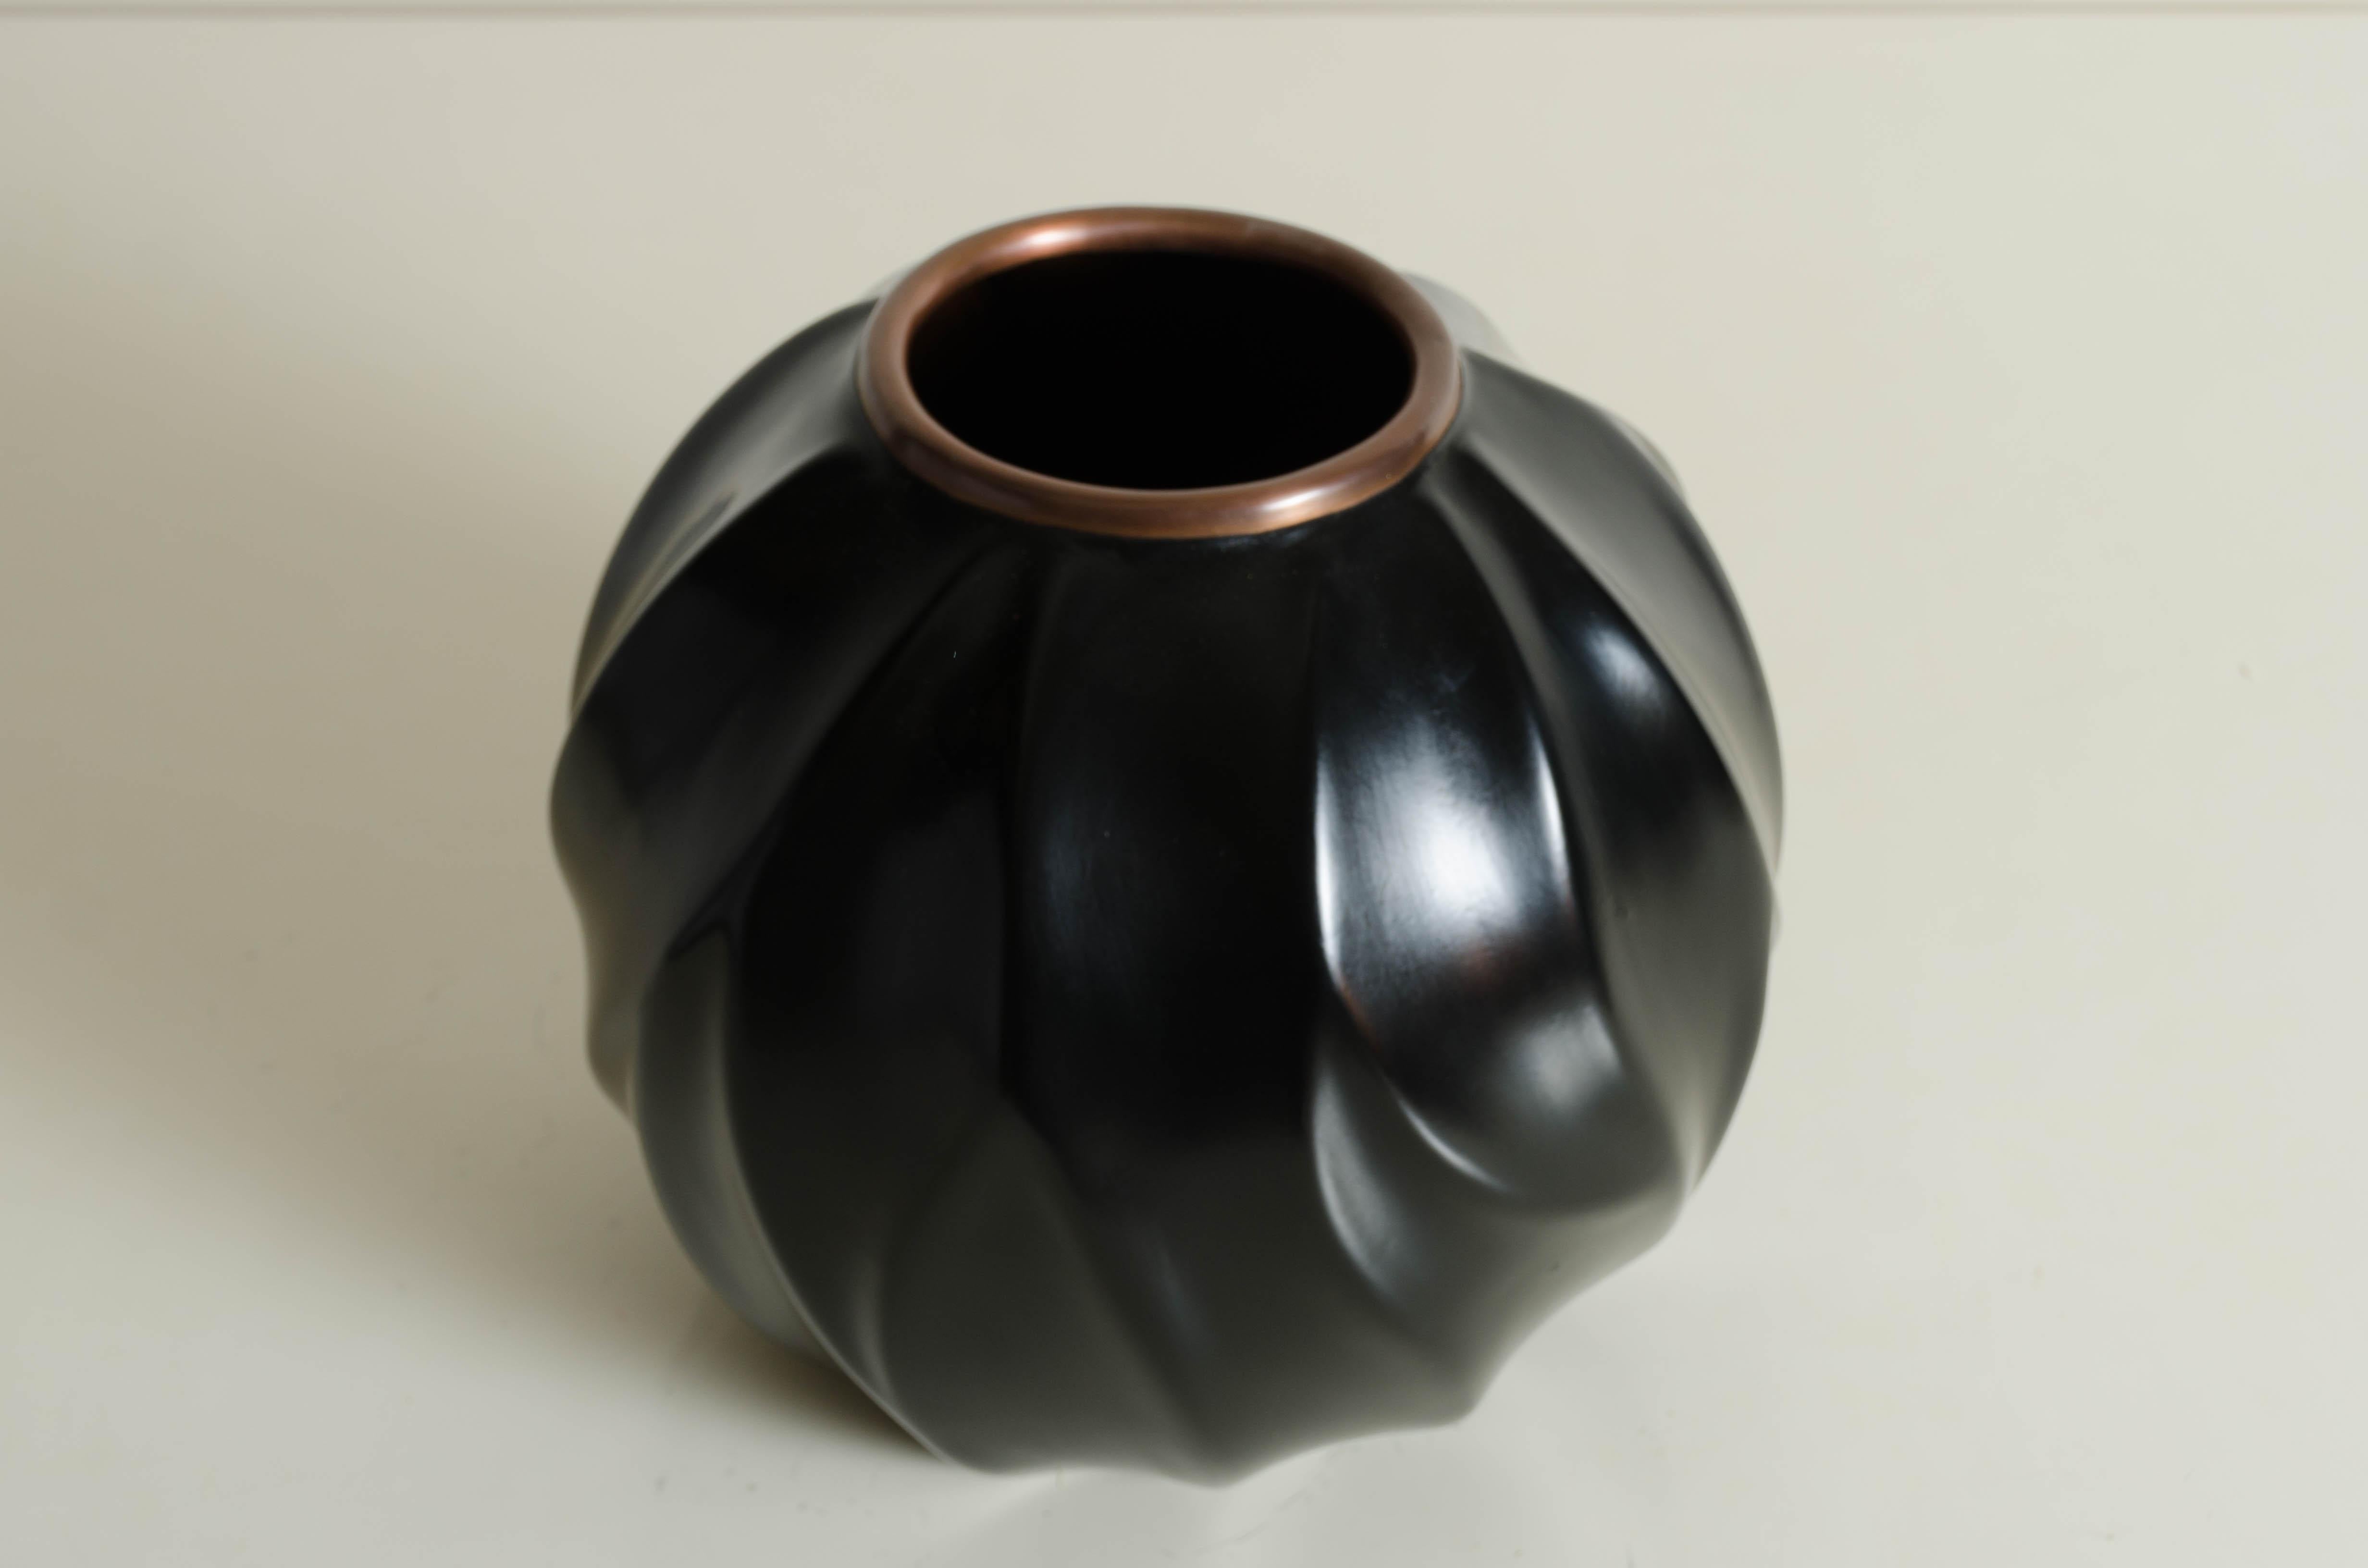 Leaf jar with copper rim
Black lacquer (60 coats)
Copper base
Hand repousse
Limited edition

Lacquer is a laborious and time-consuming process. After it is tapped from the
trees, lacquer needs to be boiled and strained to rid of impurities